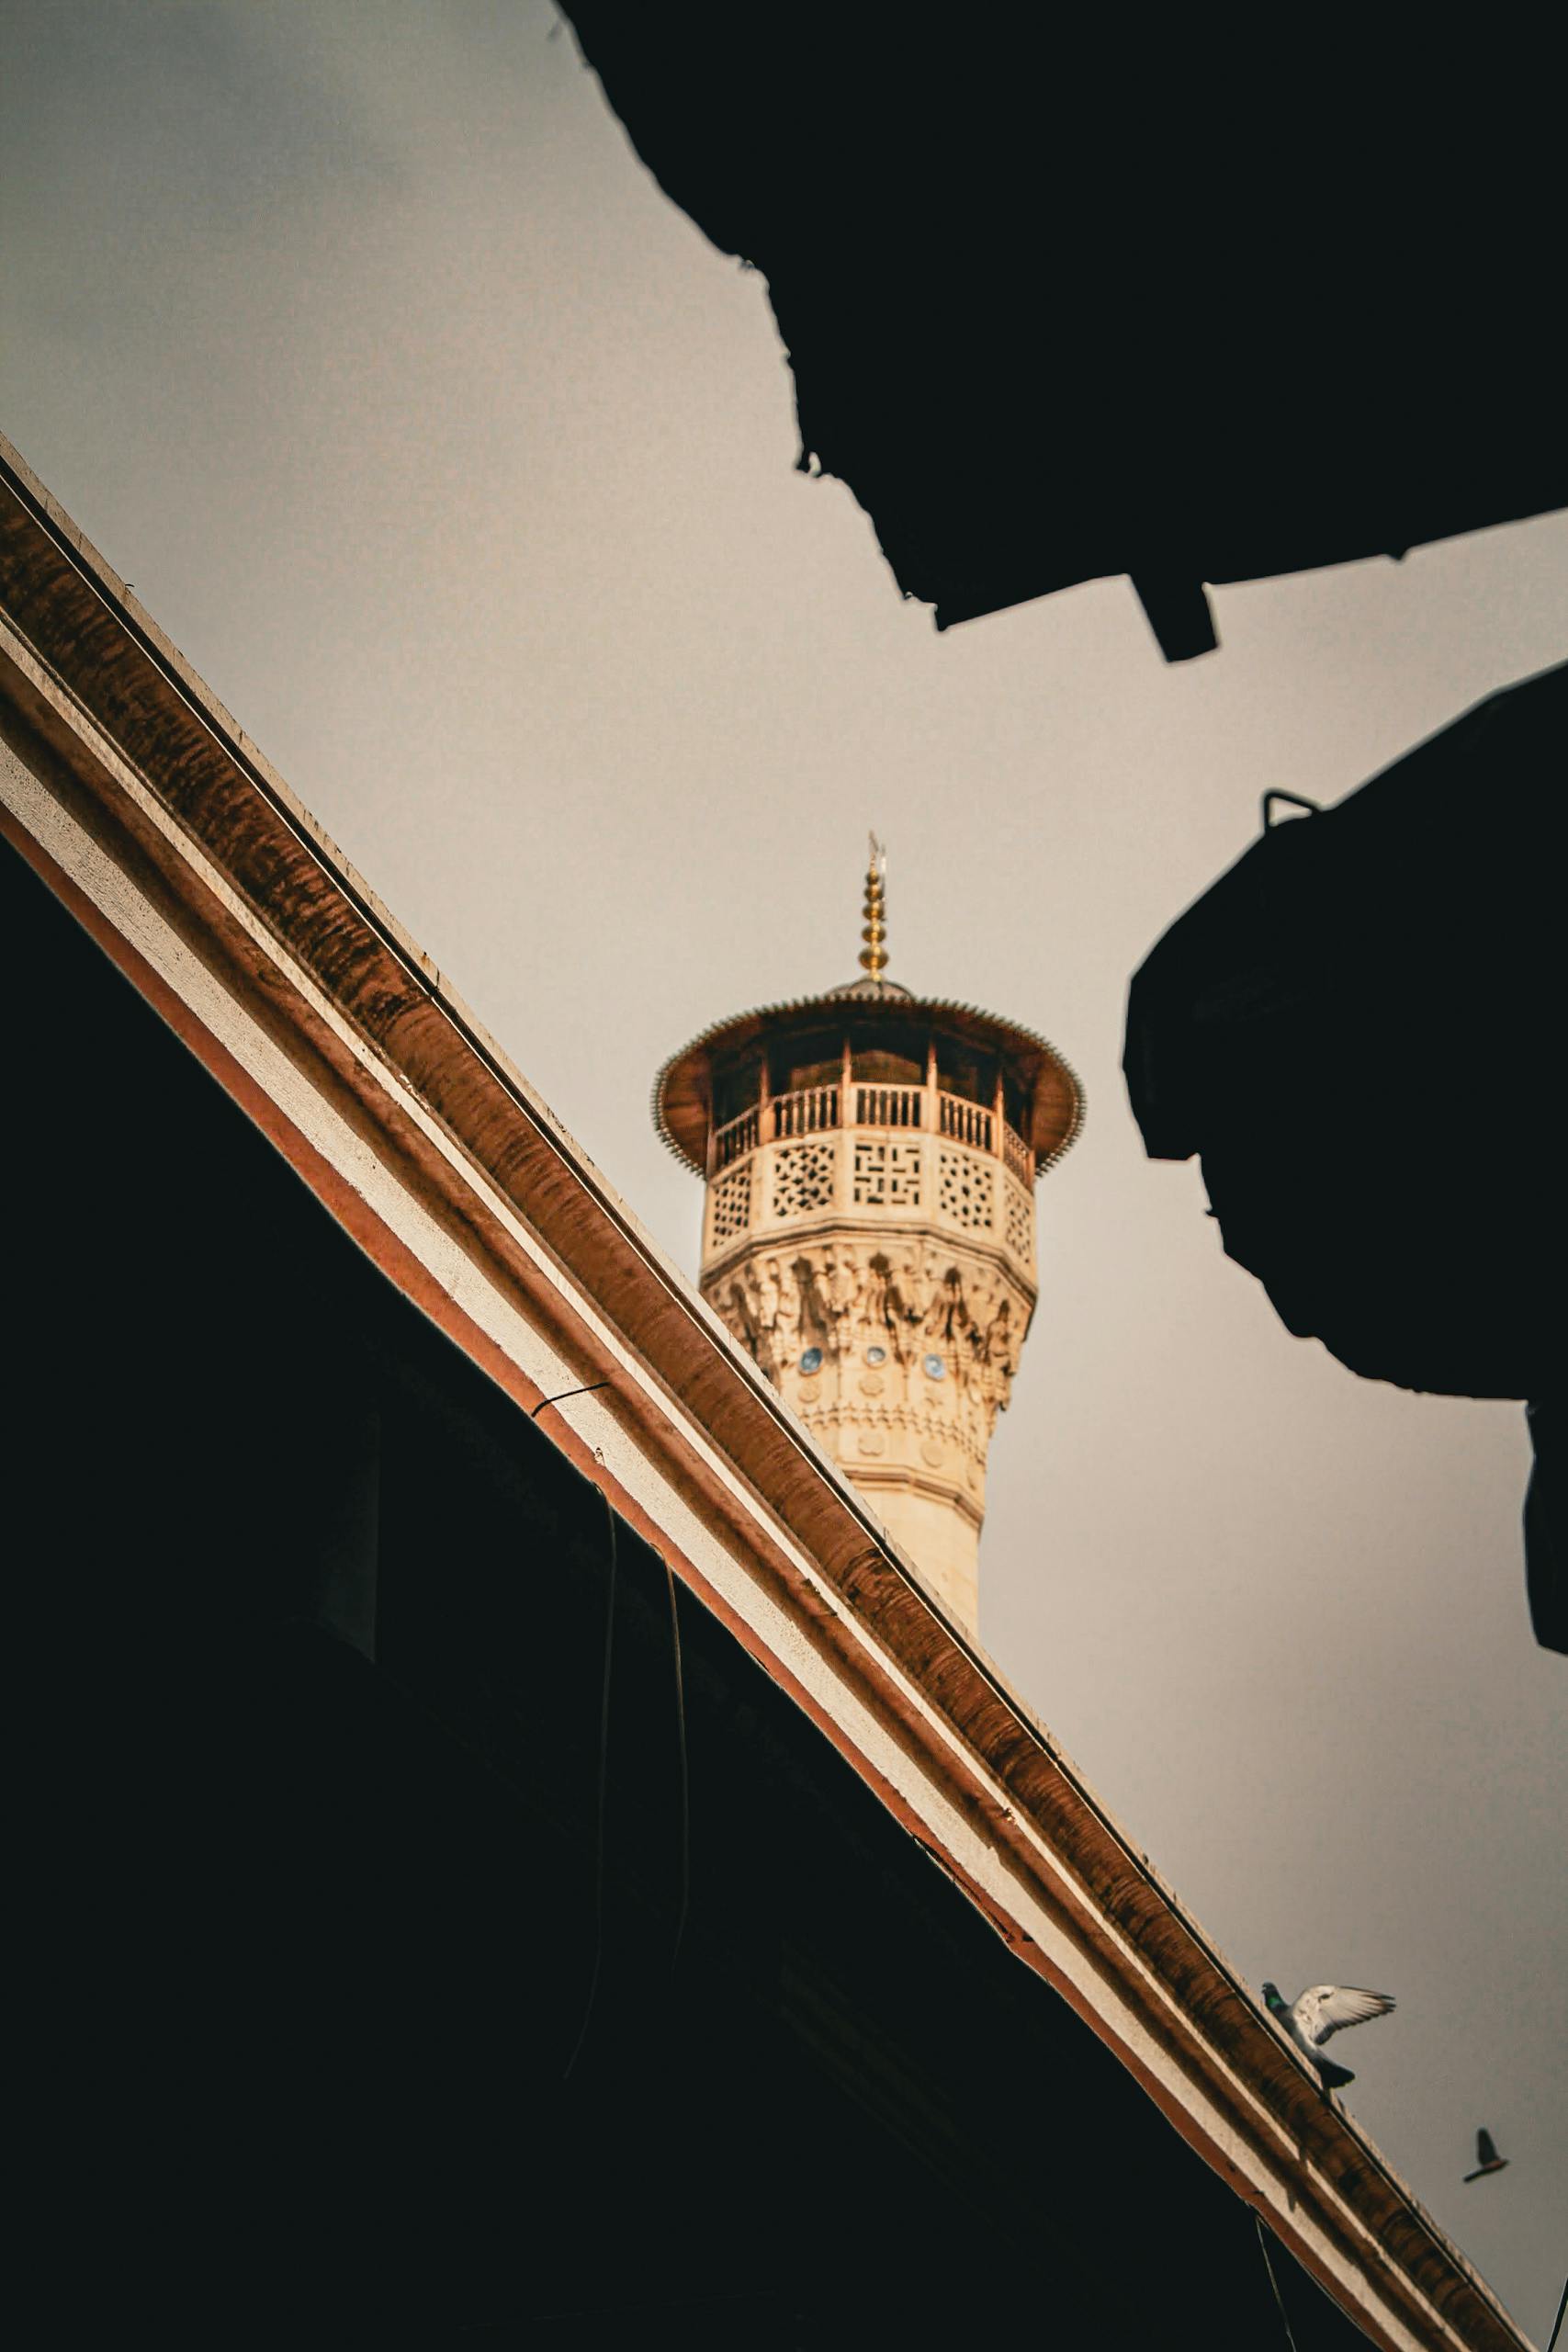 Low Angle Shot of the Minaret in Gaziantep, Turkey